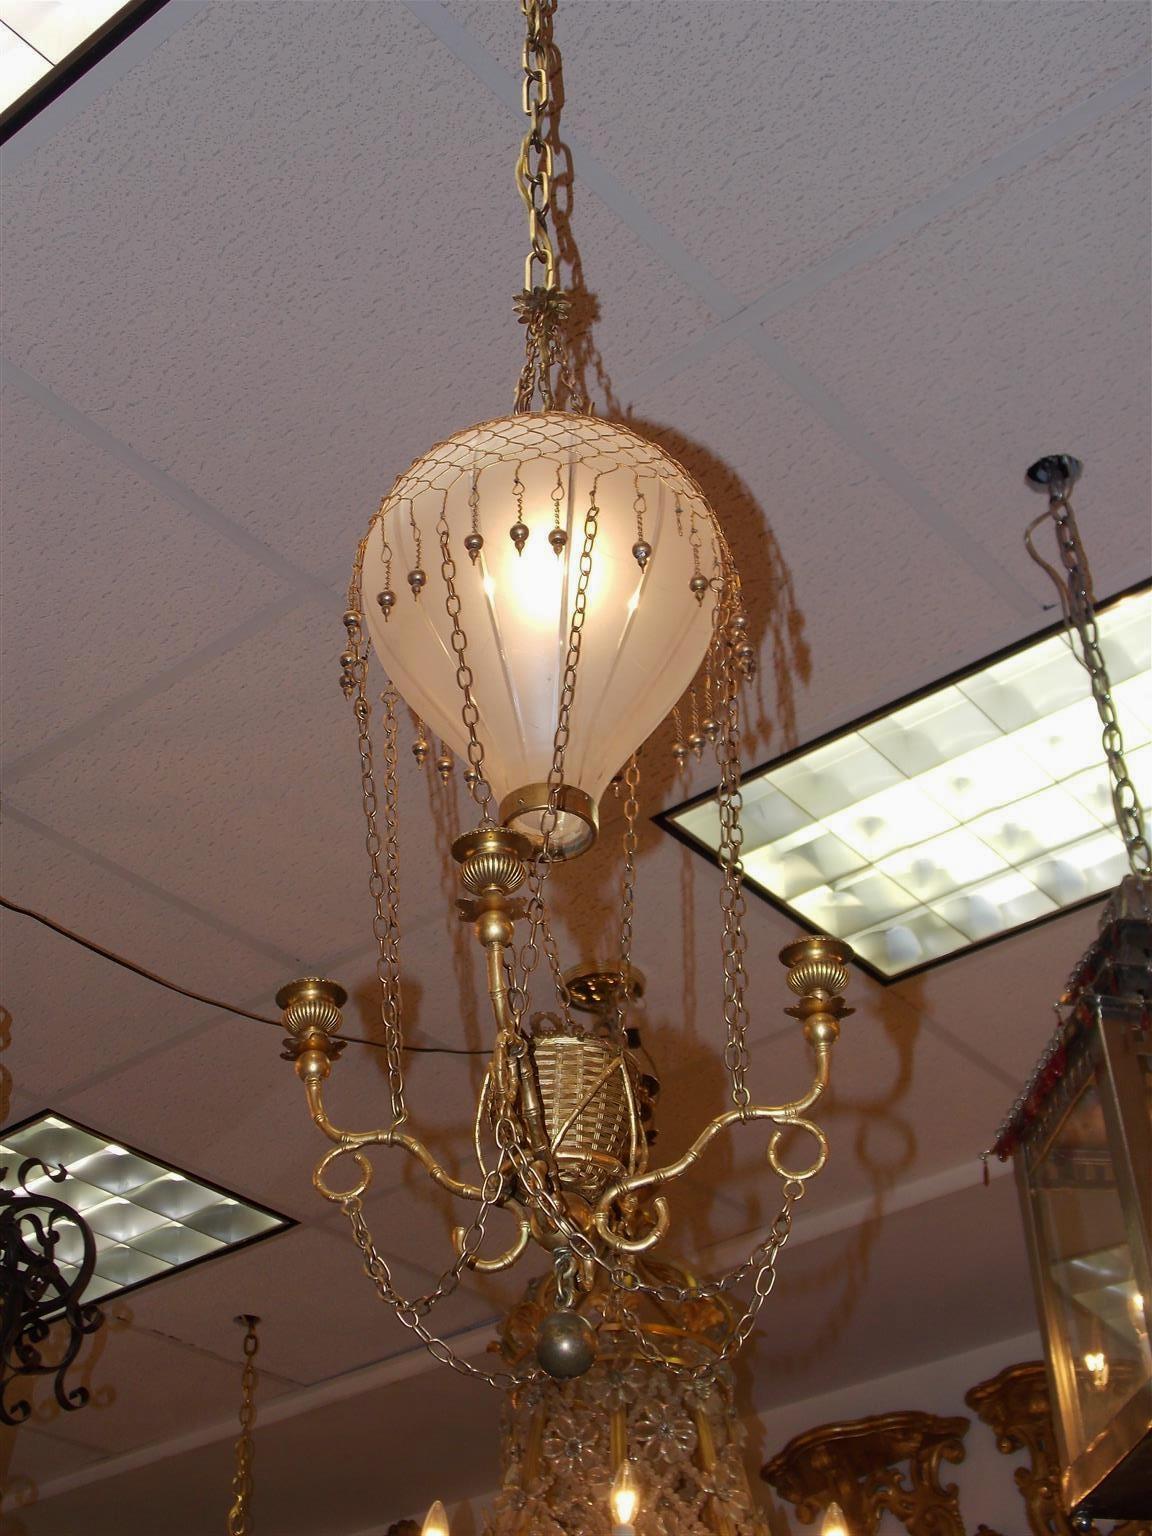 French Montgolfier gilt bronze and frosted etched glass balloon hanging hall chandelier with centered woven floral and ribbon basket, cascading netting, four exterior bamboo scrolled candle arms and terminating with a centered lower gilt brass ball.